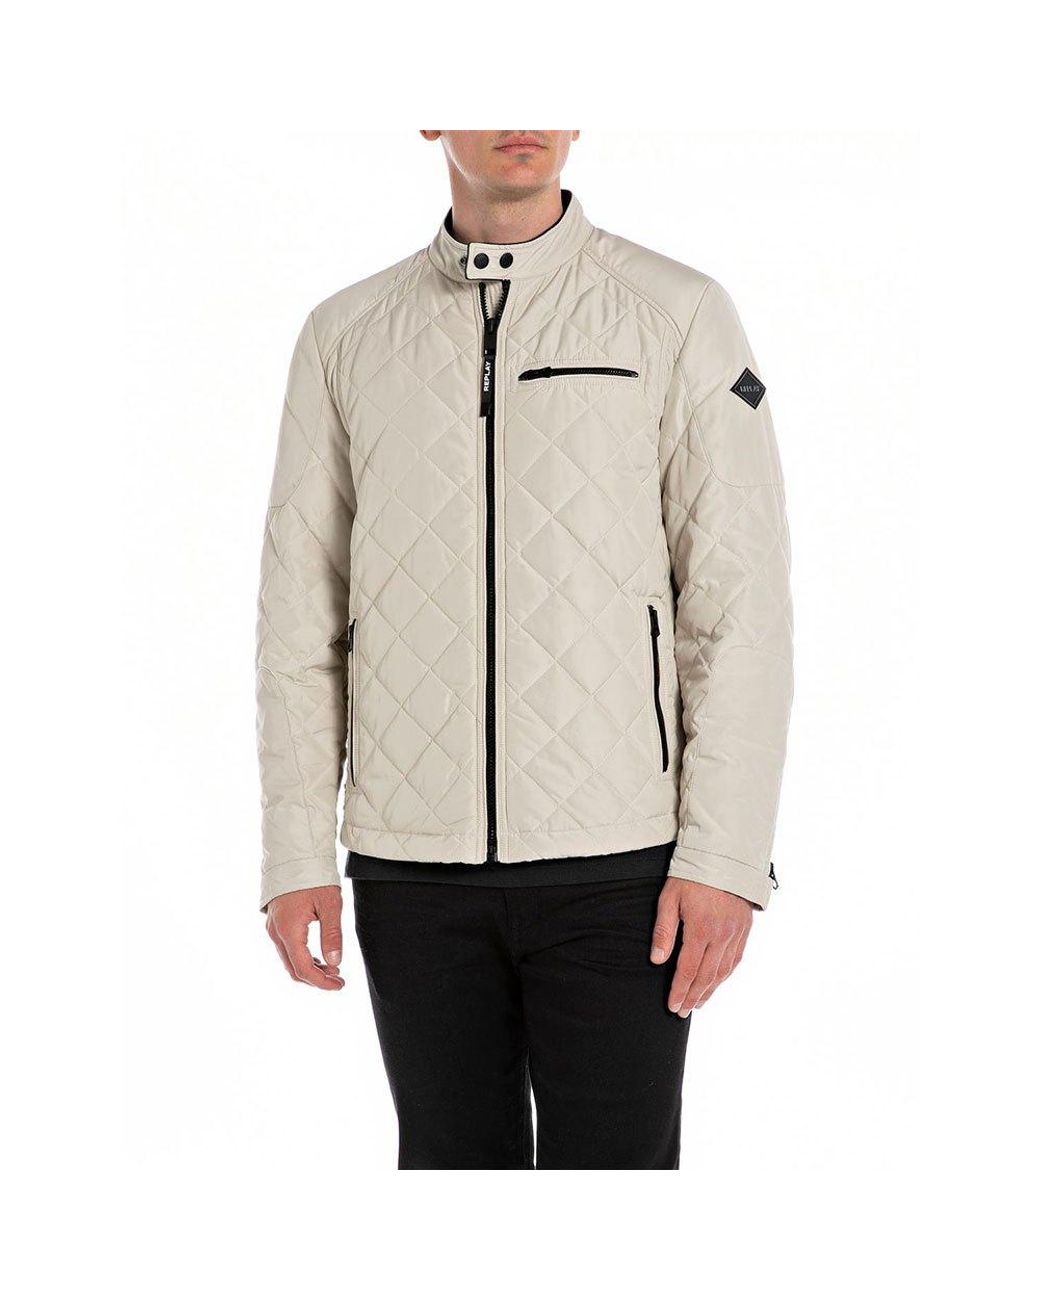 Replay Repay 8000 .000.84442 Jacket in Natural for Men | Lyst